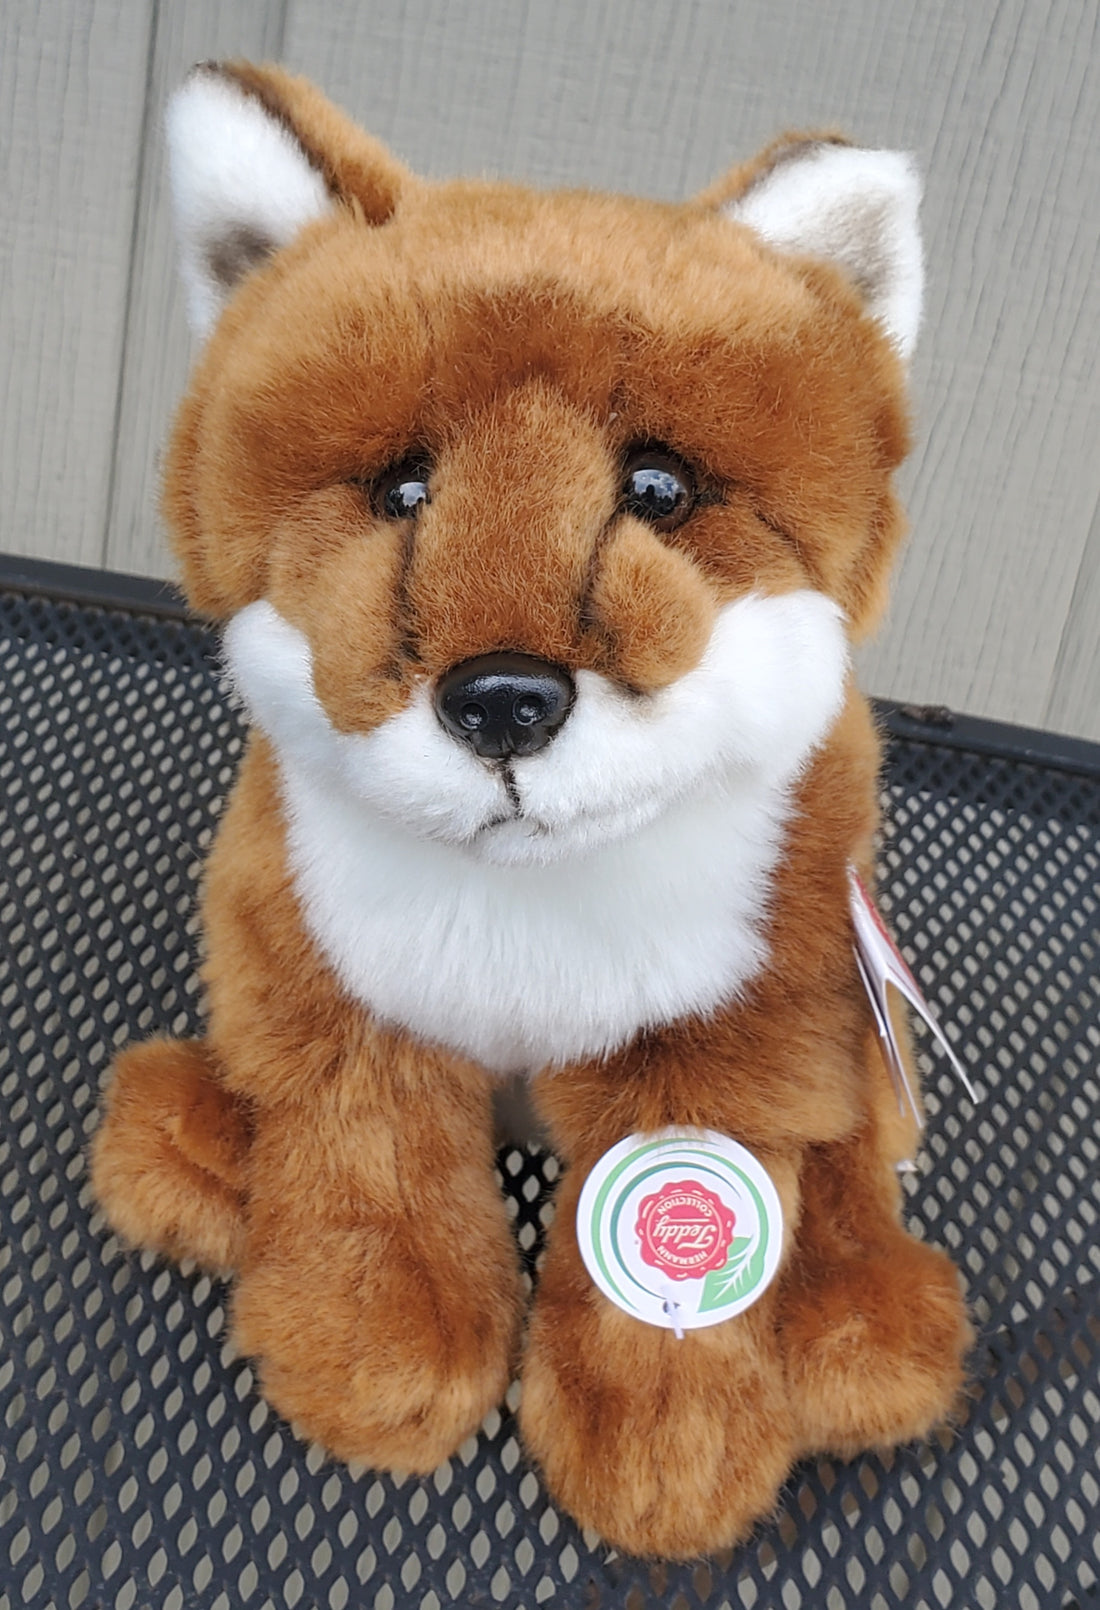 Fox - 8" Baby Safe - Non-Jointed by Teddy Hermann